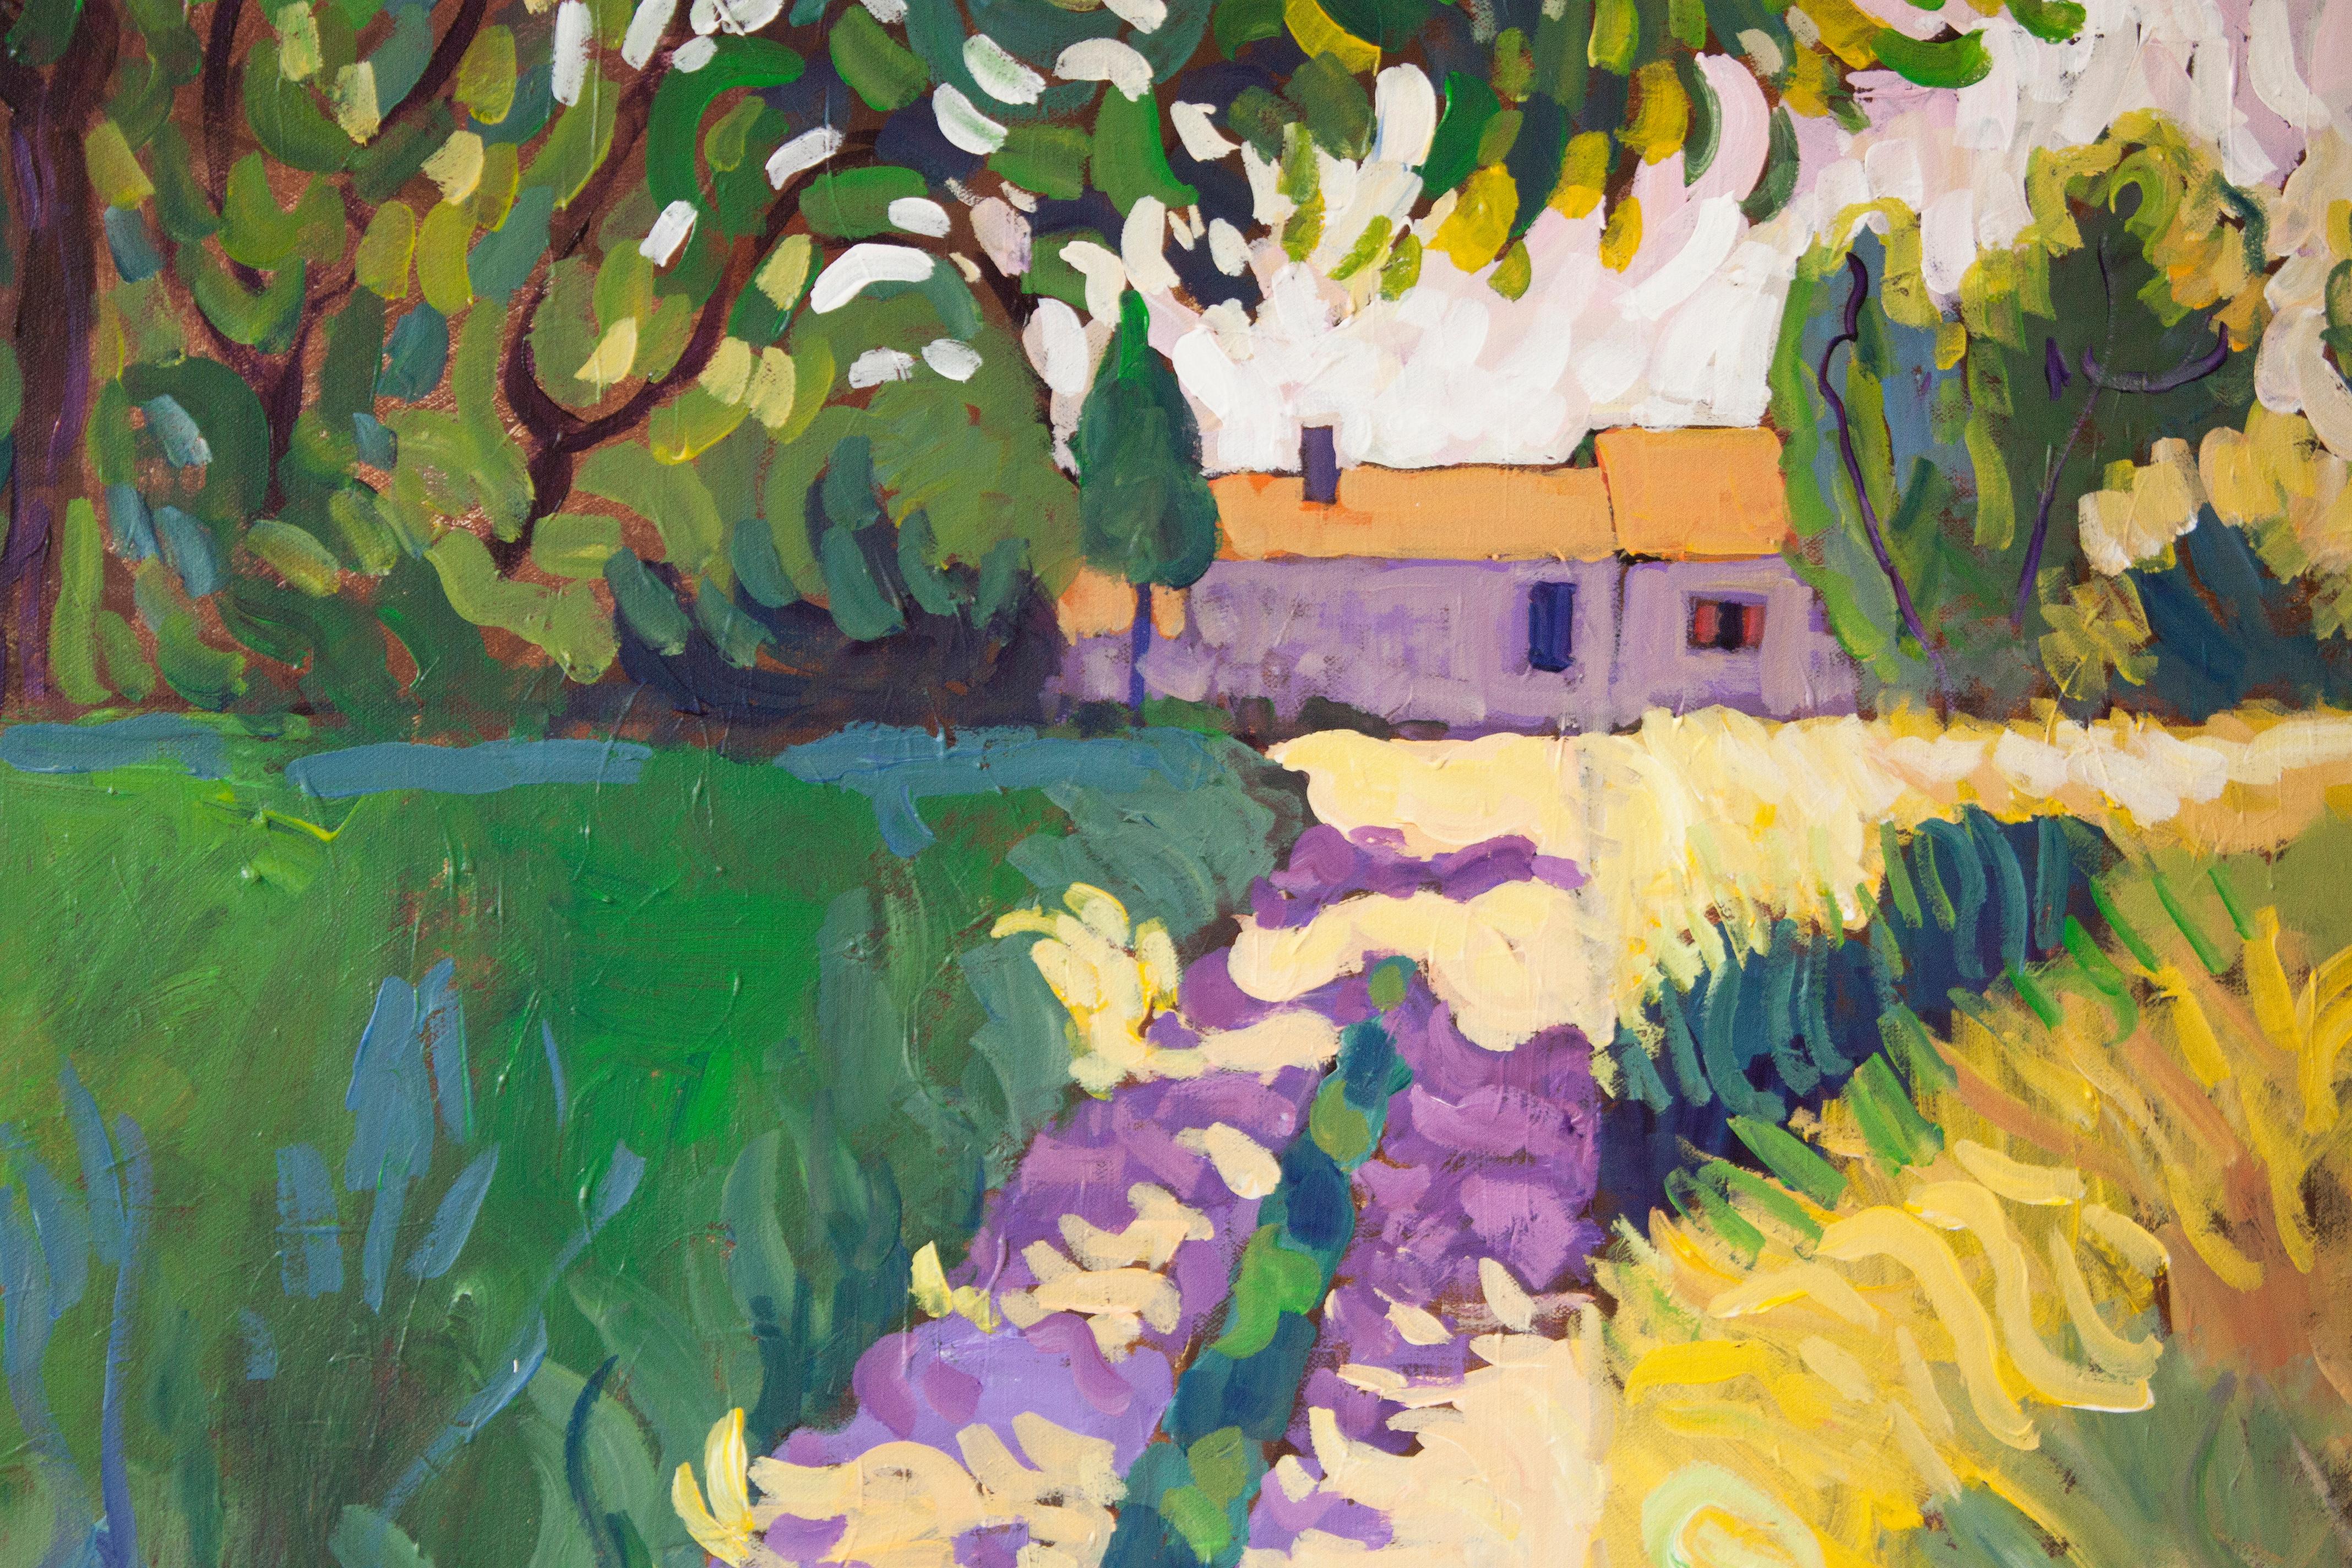 Summer Lane - Abstract Expressionist Painting by Robert Hofherr